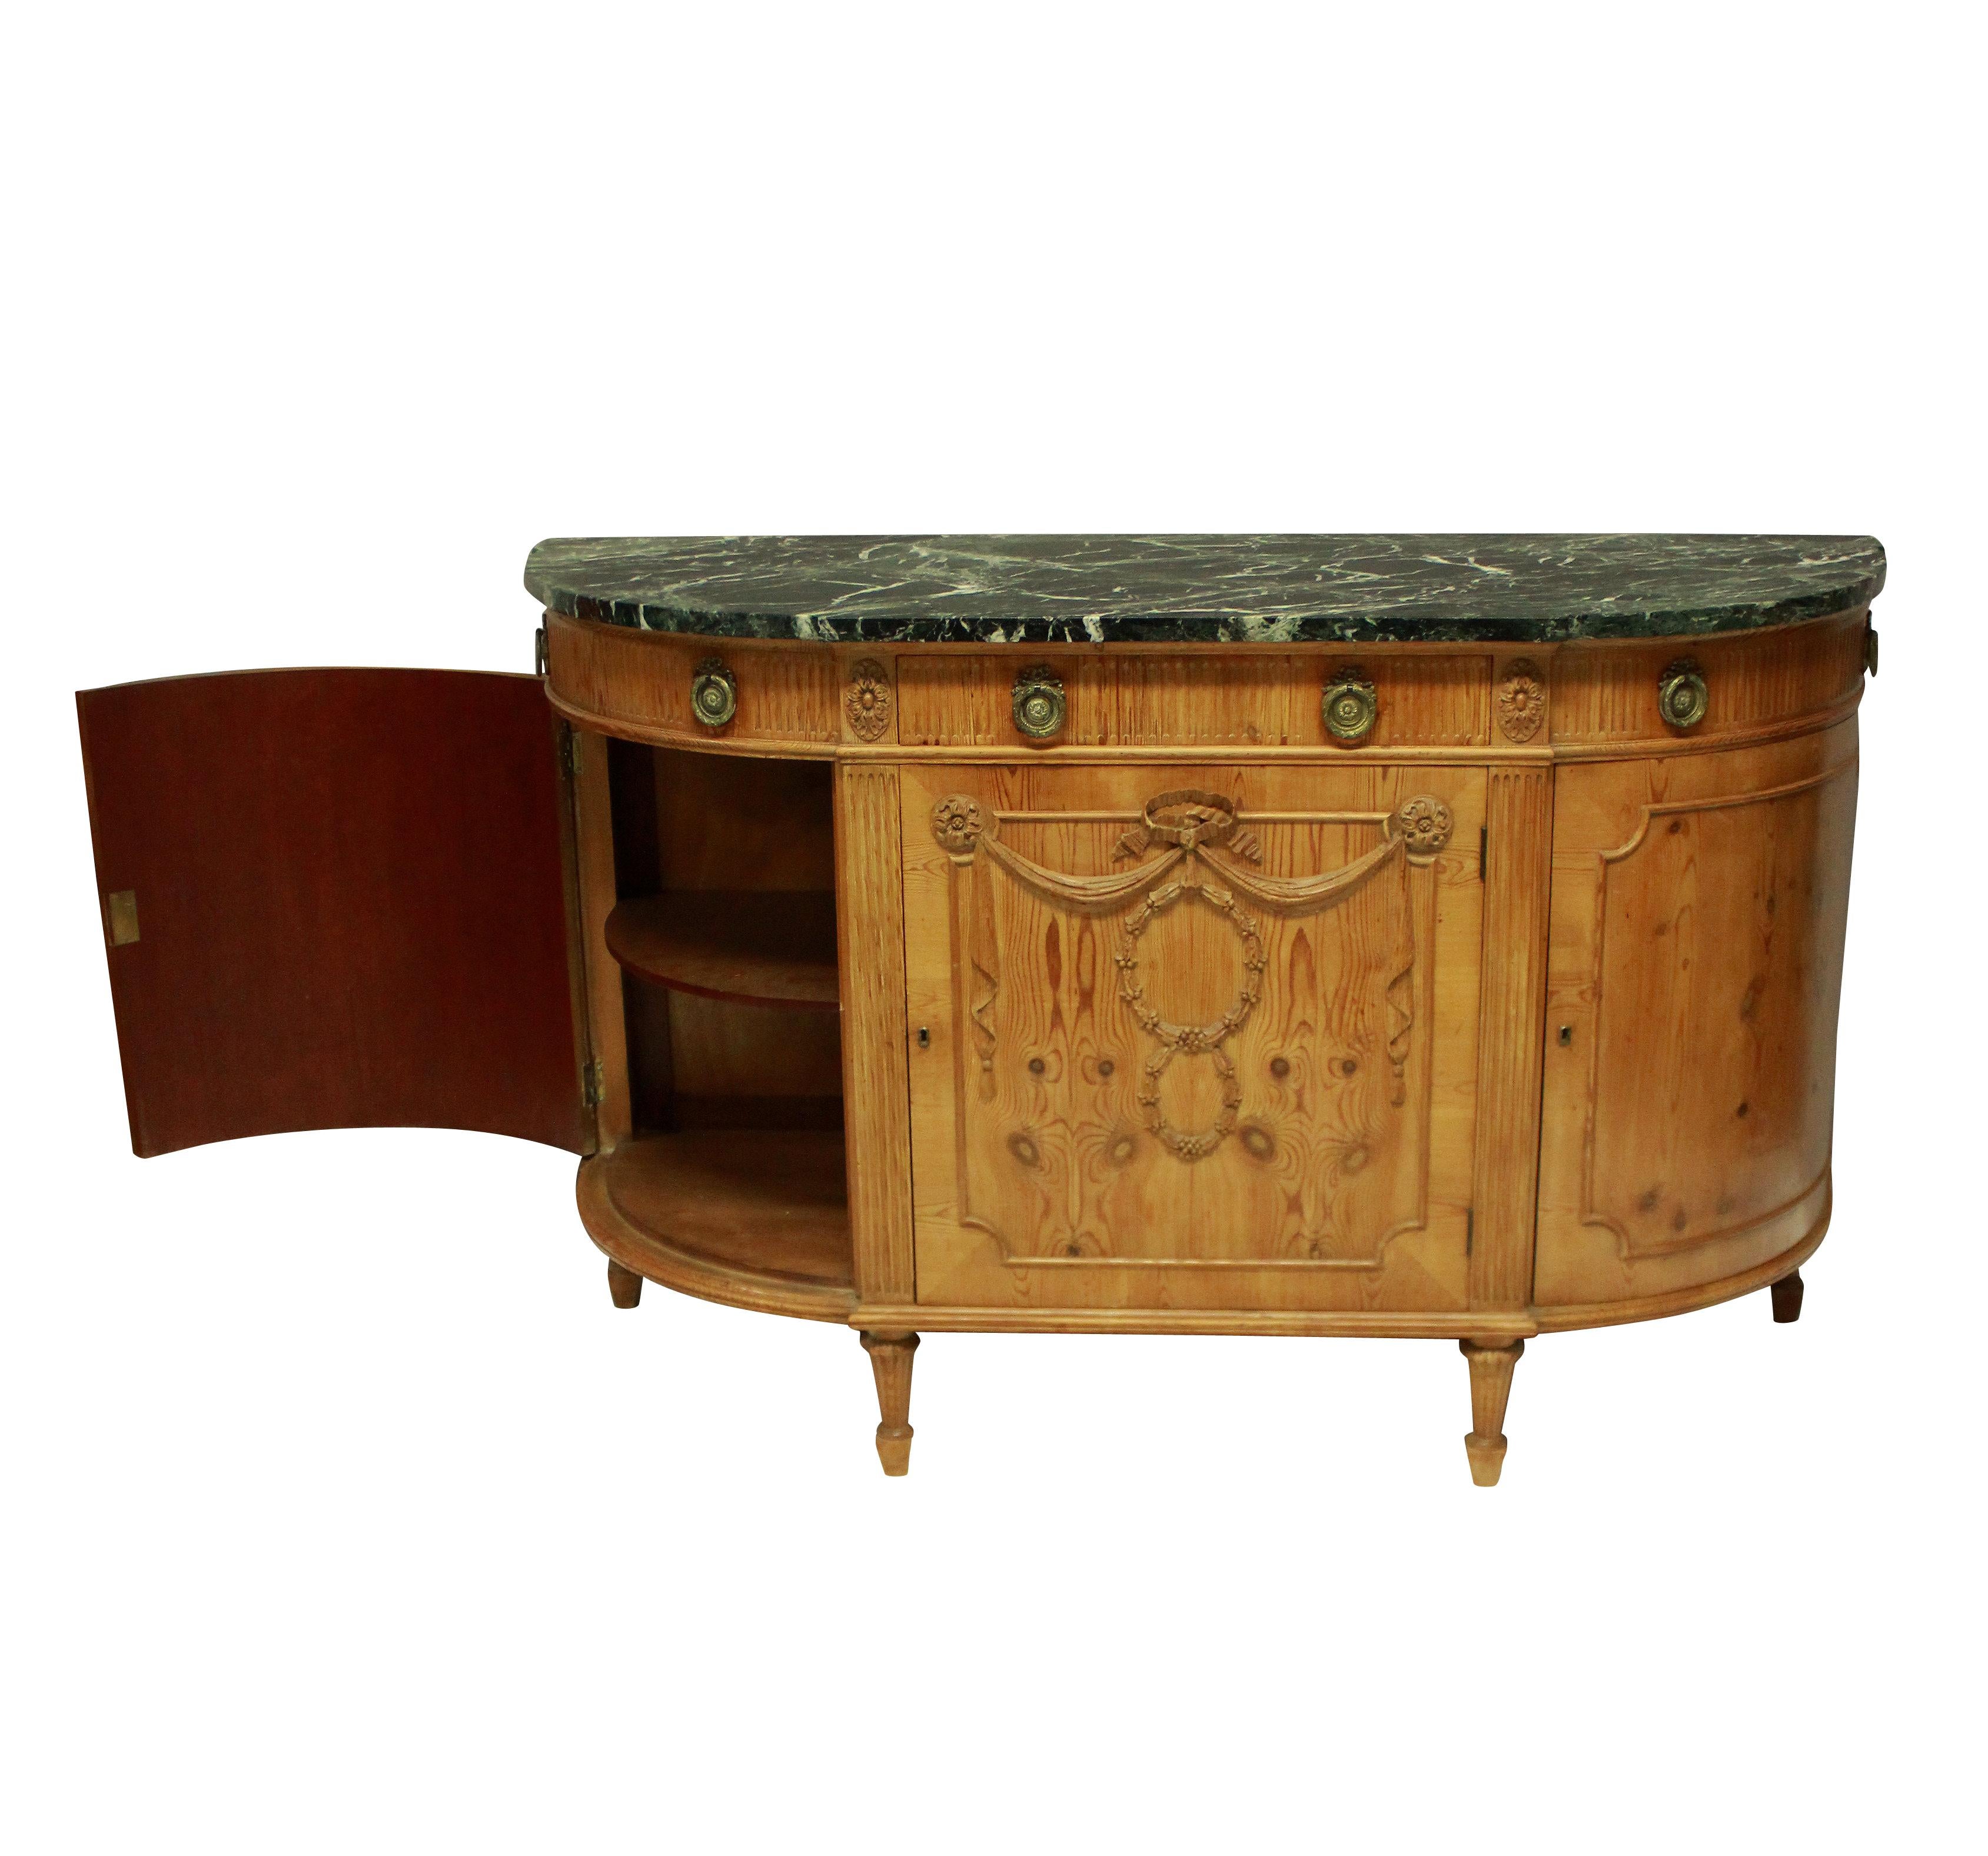 An unusual Northern French Louis XVI style demilune commode of generous proportions in carved pine. With a central cupboard and drawer, two side cupboards with dummy drawers, each with one shelf. The shaped top of antico Verdi marble.